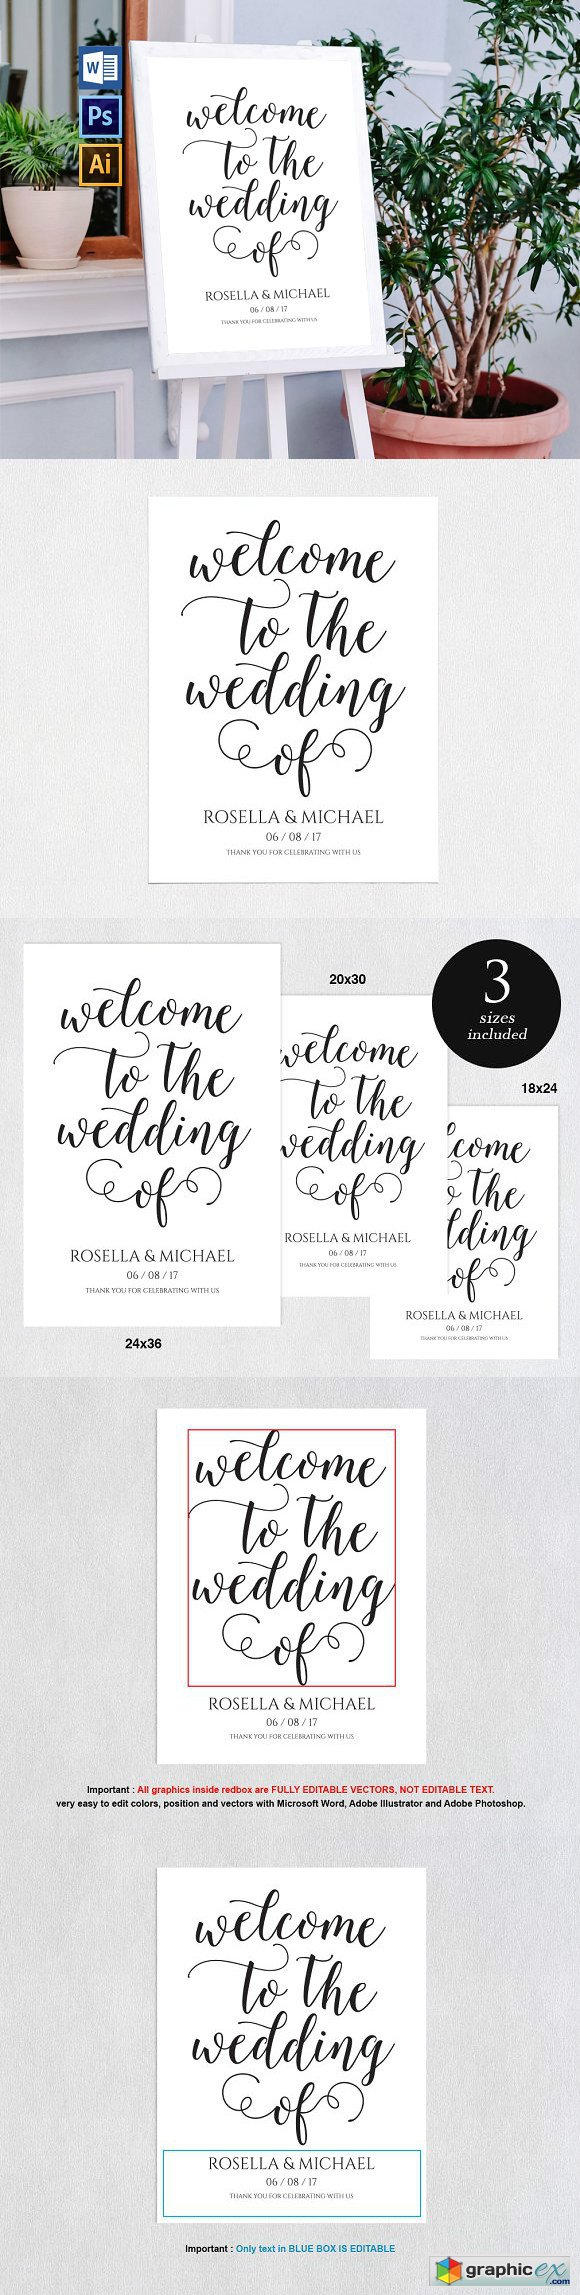 Wedding welcome sign WPC202